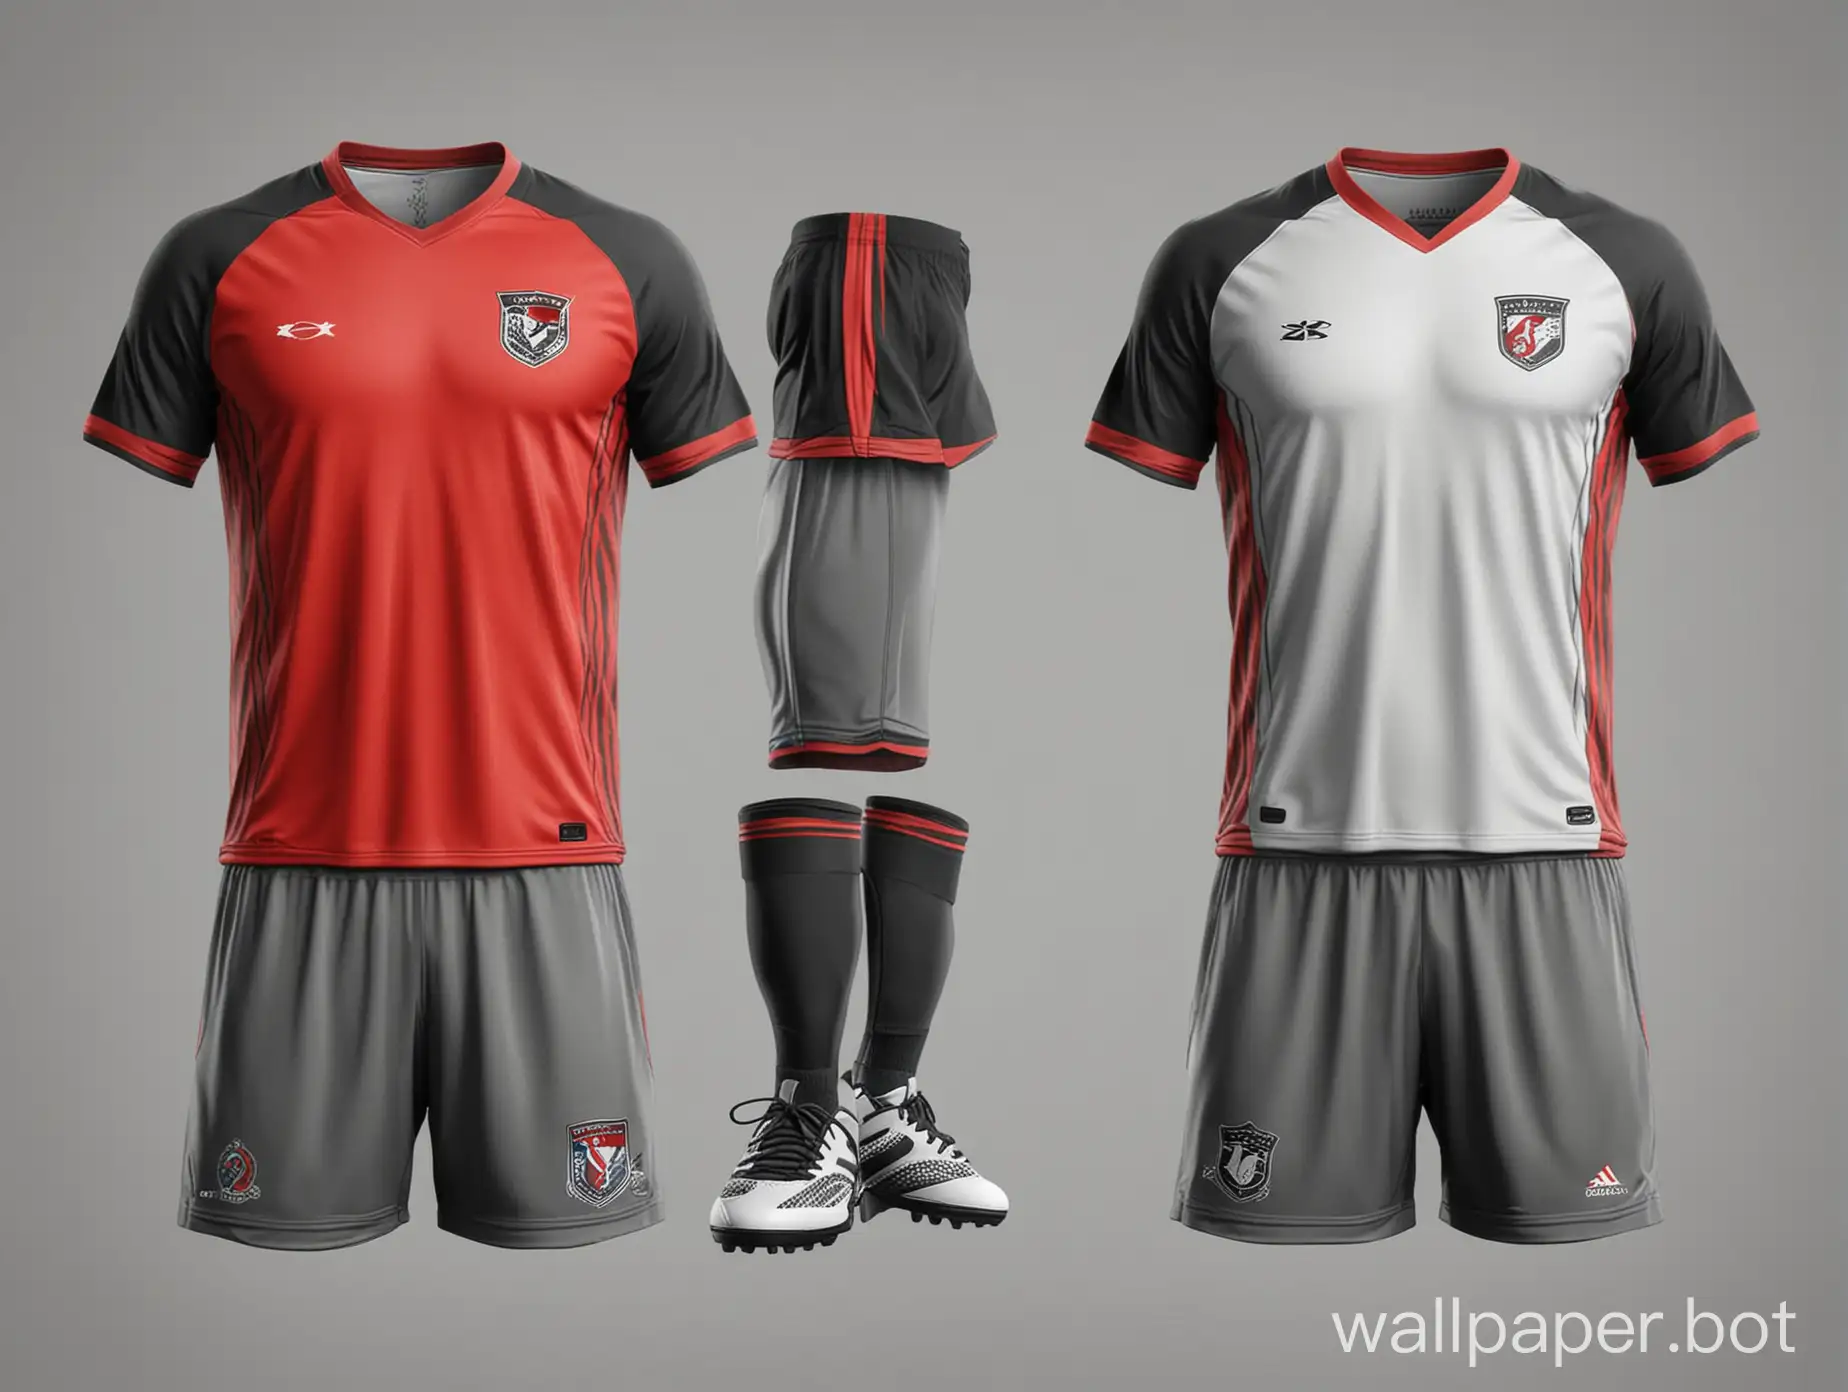 Symmetrical-Red-Gray-and-Black-Soccer-Uniform-Sketch-on-White-Background